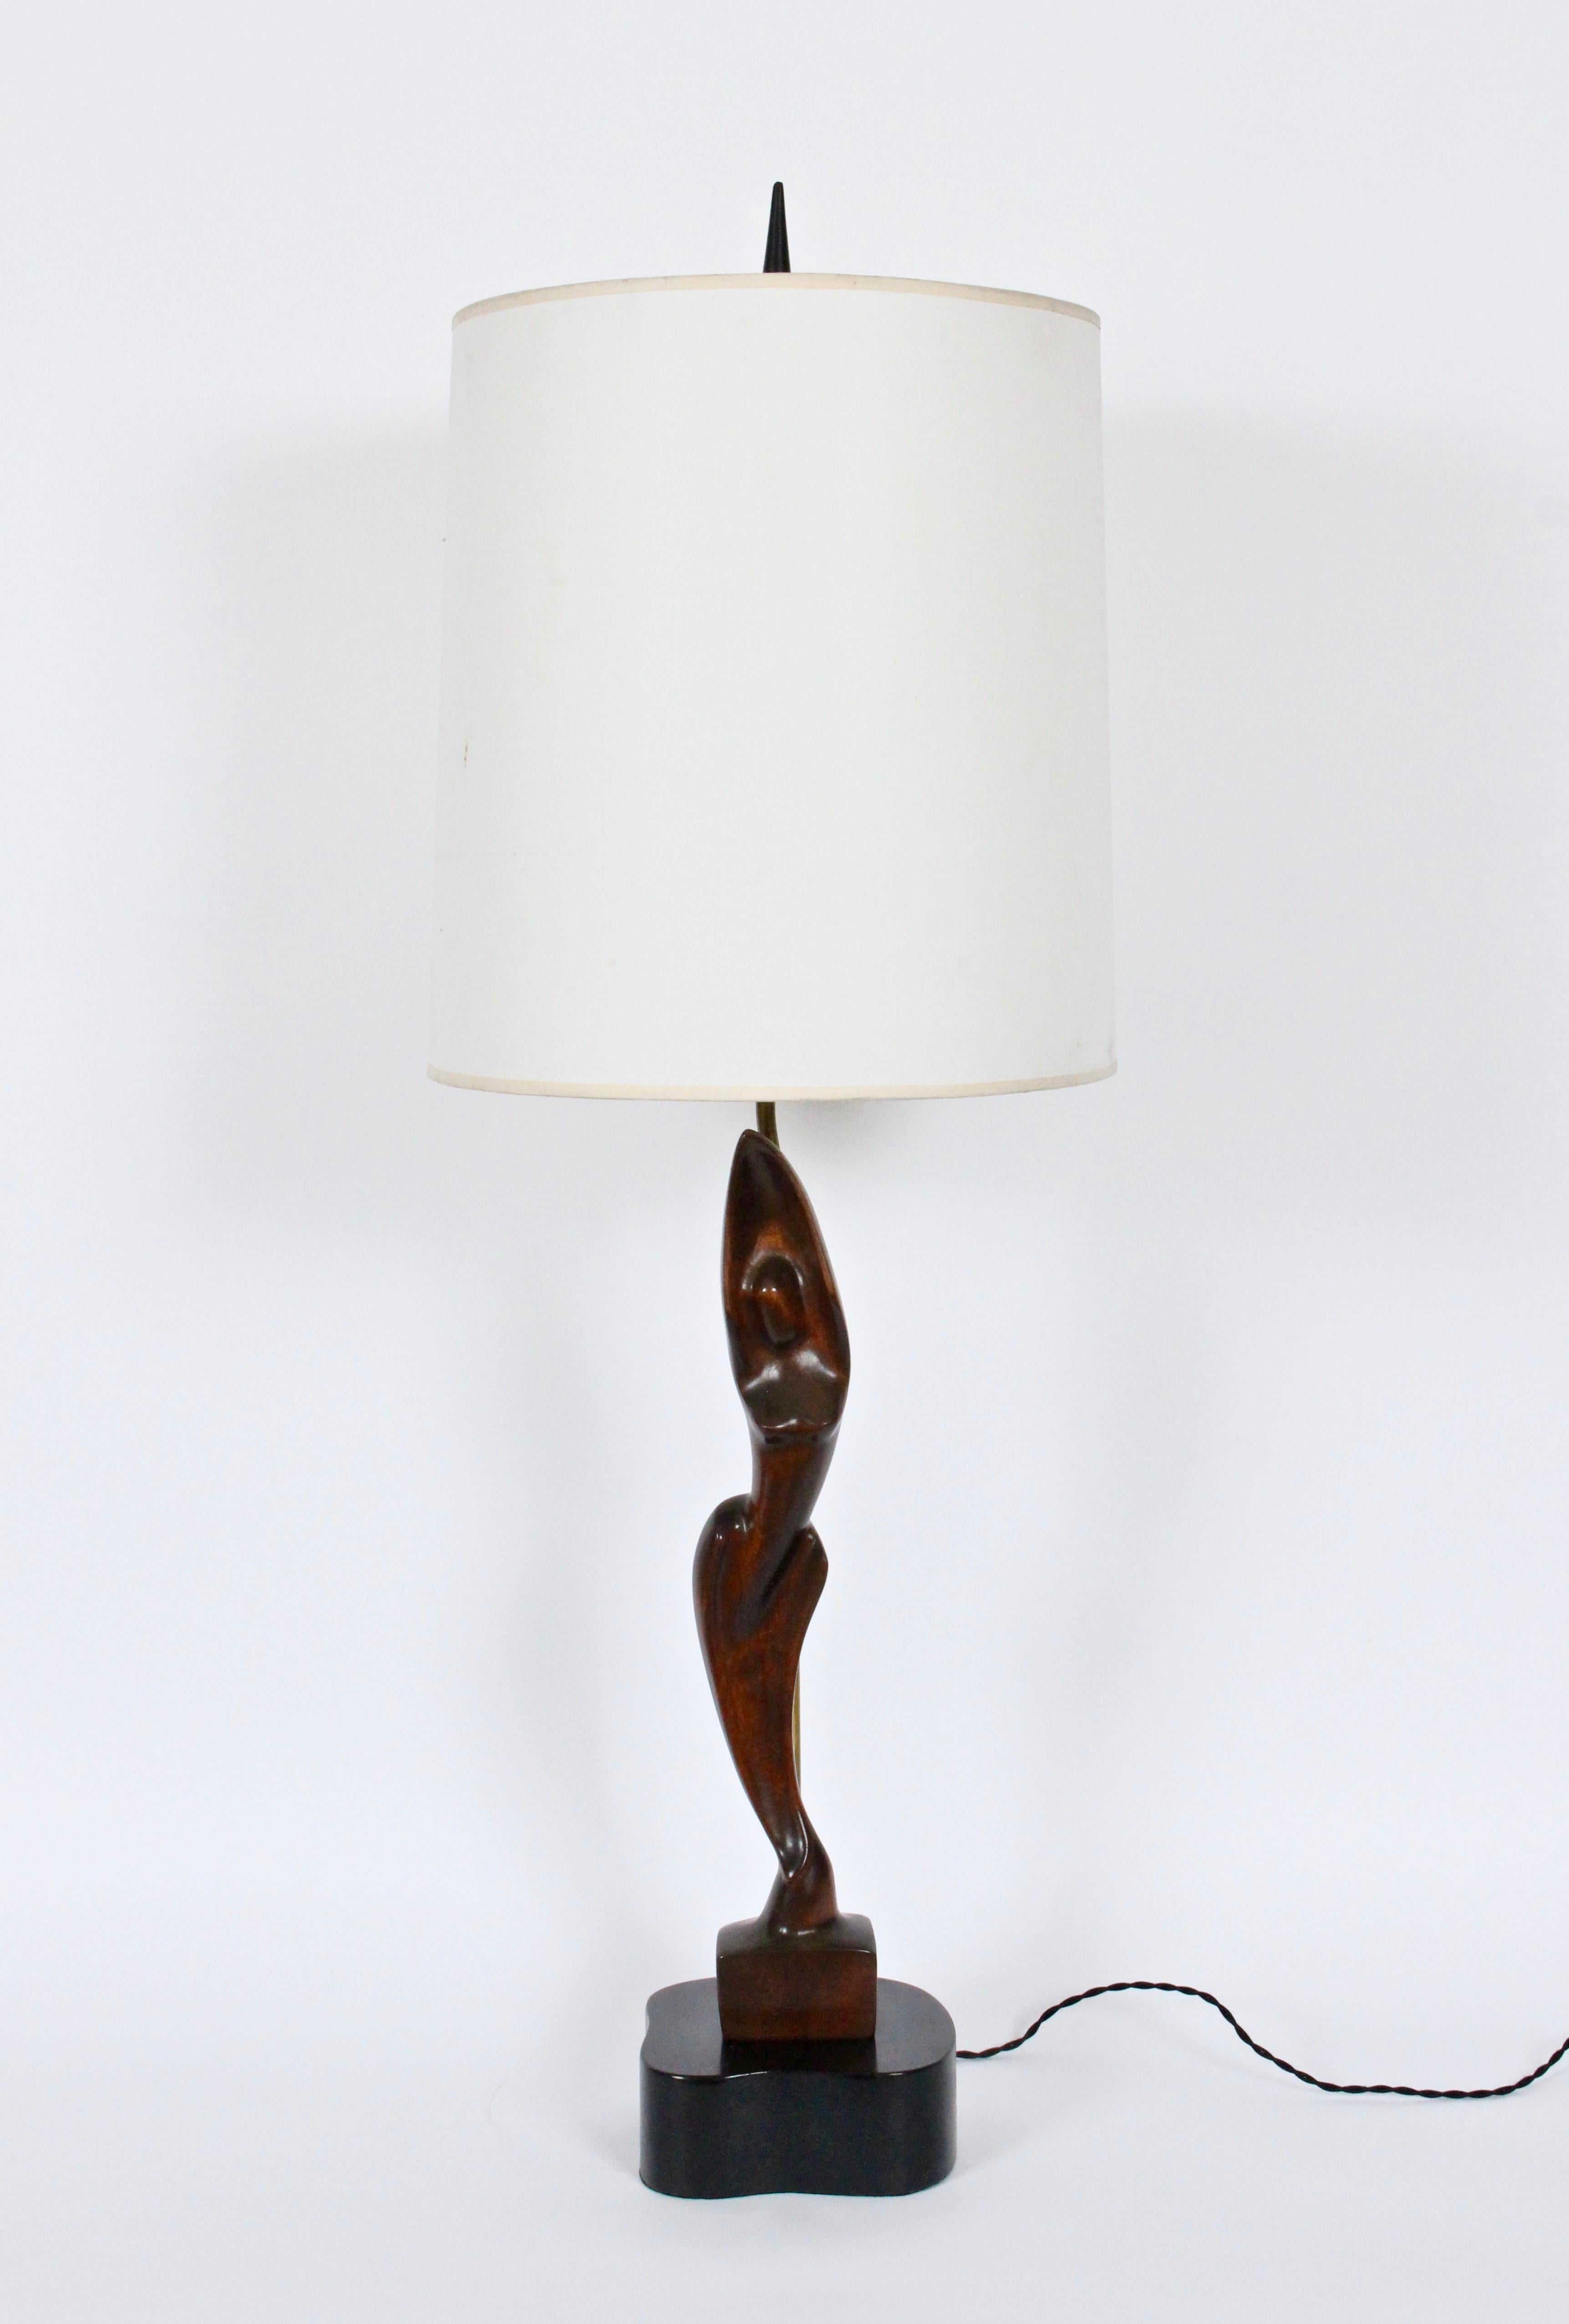 Monumental Yasha Heifetz hand-carved mahogany female form table lamp. Handcrafted slim, smooth mahogany figure mounted on free-form black enameled wooden base. Small footprint. 30H to top of socket. 24H to top of figure. Shade shown for display only